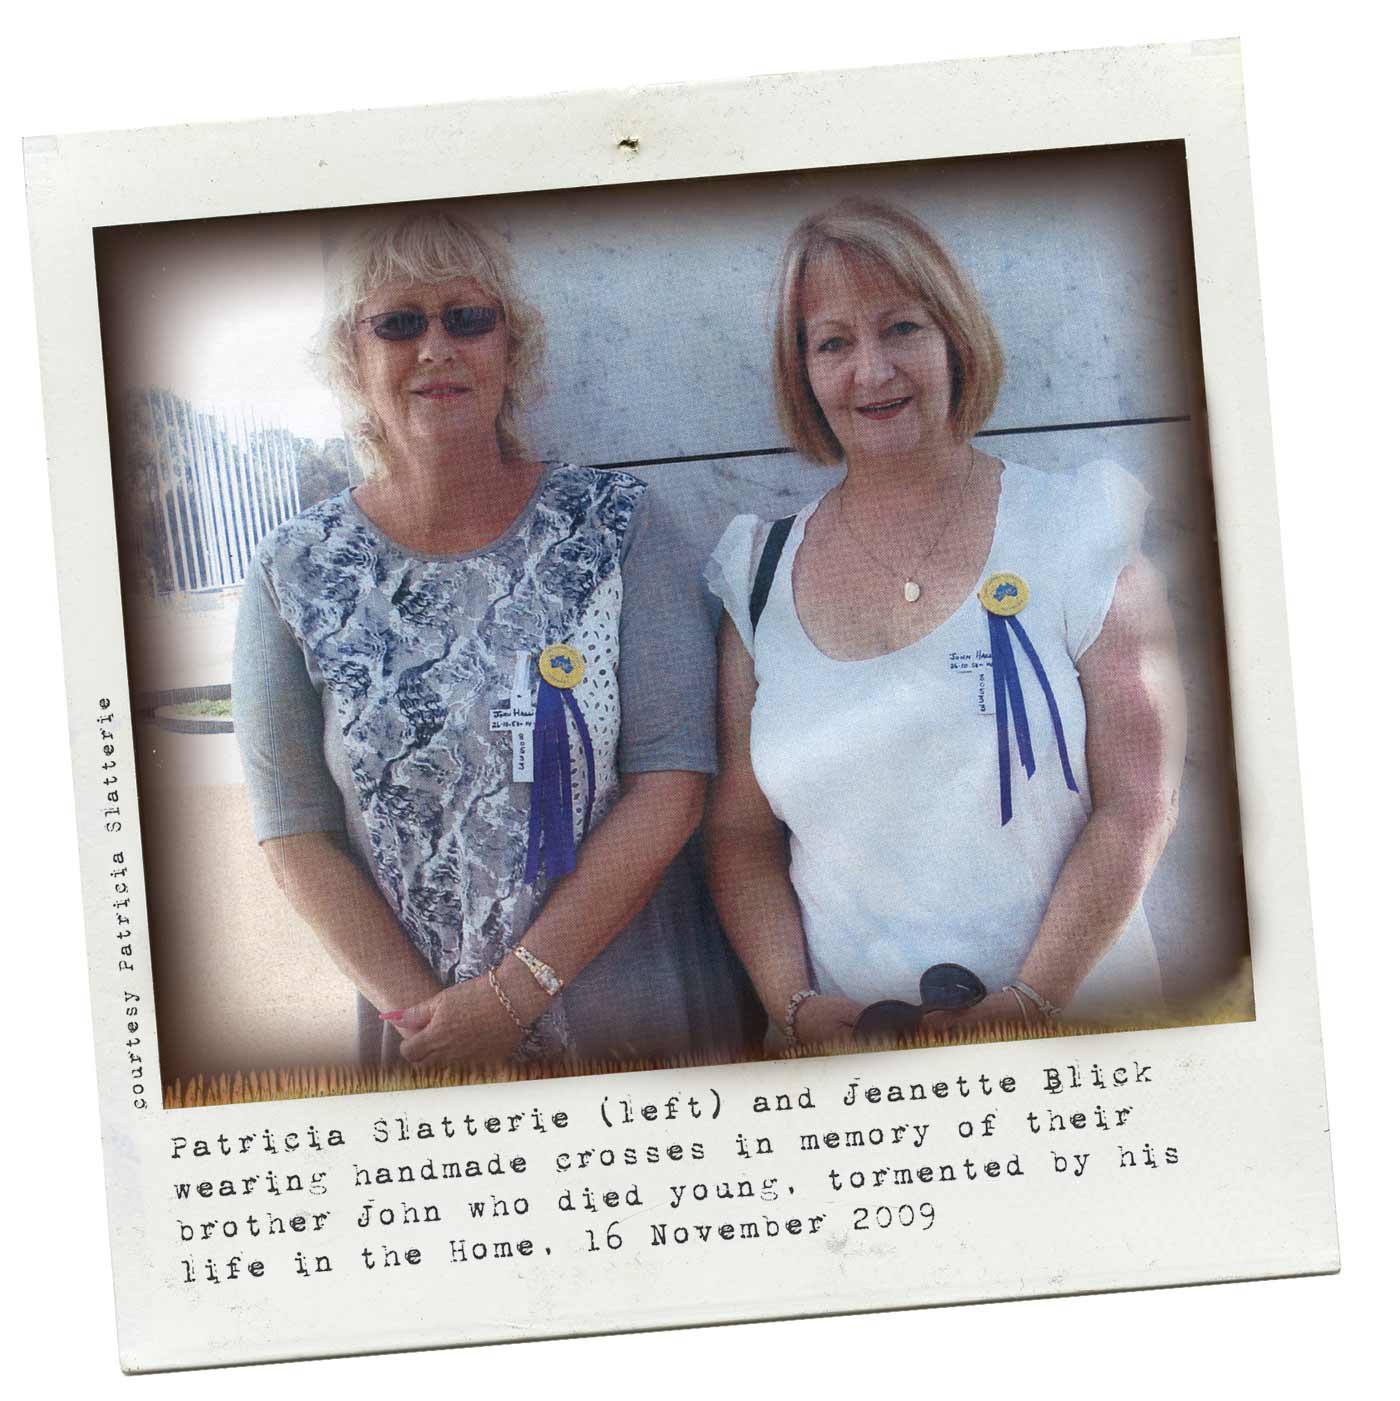 A colour Polaroid image of two women wearing badges and blue ribbons pinned to their shirts. Typewritten text below reads 'Patricia Slatterie (left) and Jeanette Blick wearing handmade crosses in memory of their brother John who died young, tormented by his life in the Home, 16 November 2009.' 'Courtesy Patricia Slatterie' is typed along the left side. - click to view larger image